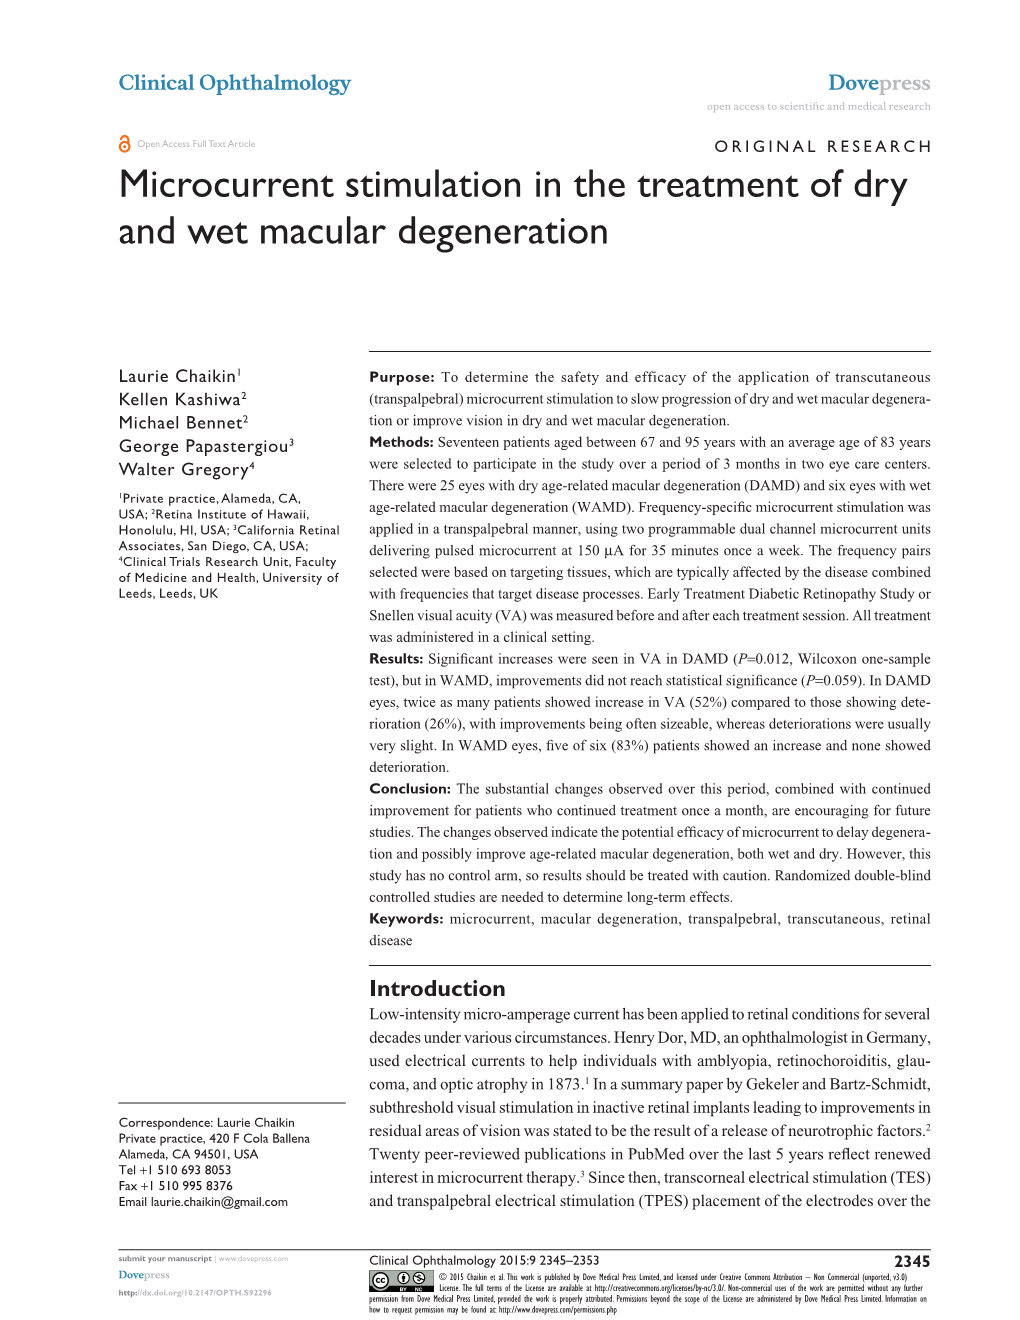 Microcurrent Stimulation in the Treatment of Dry and Wet Macular Degeneration